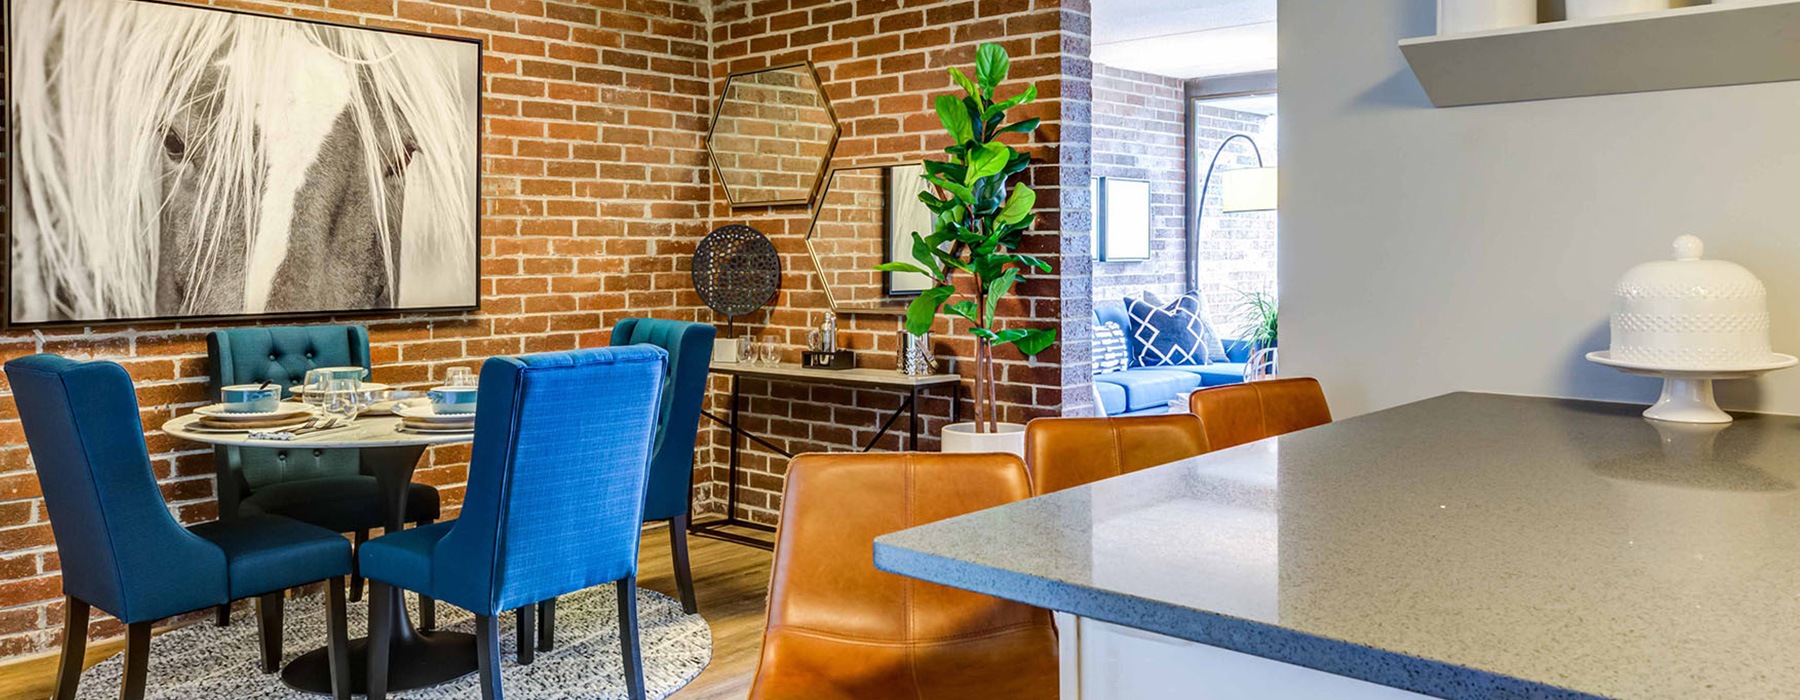 dining area with brick walls and easily connected kitchen area